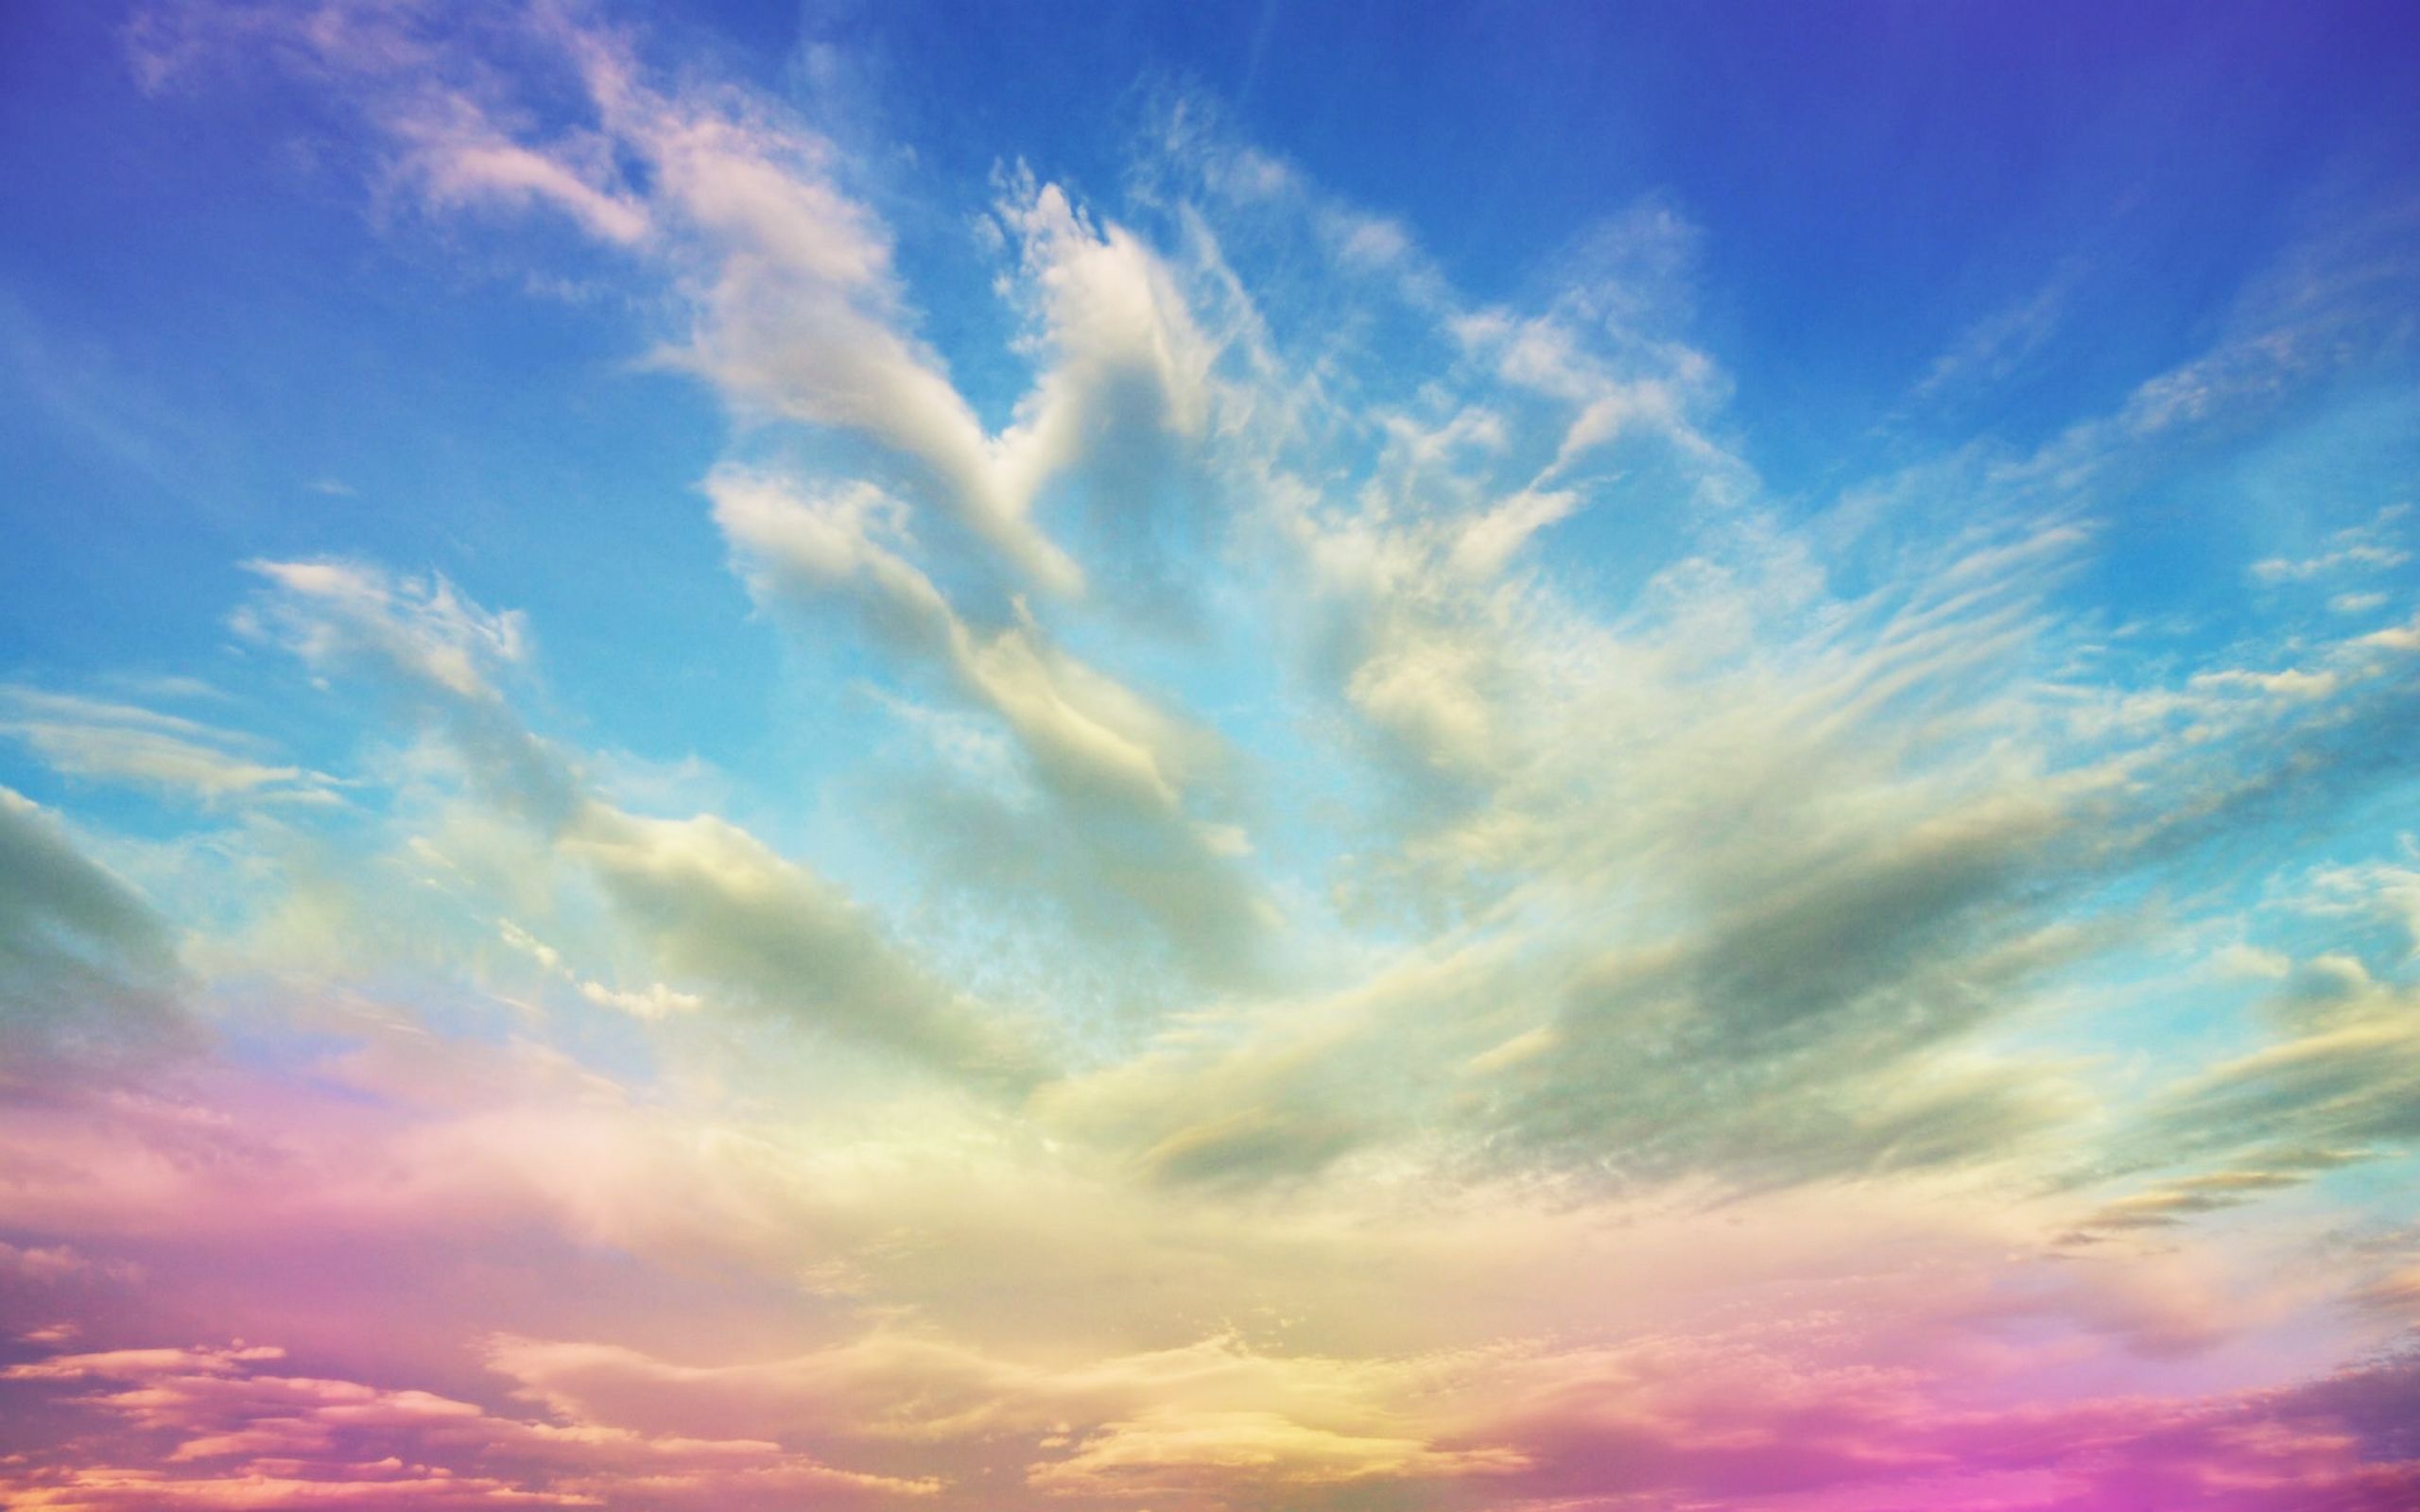 Colorful Sky Wallpaper - http://wallpaperzoo.com/colorful-sky ...